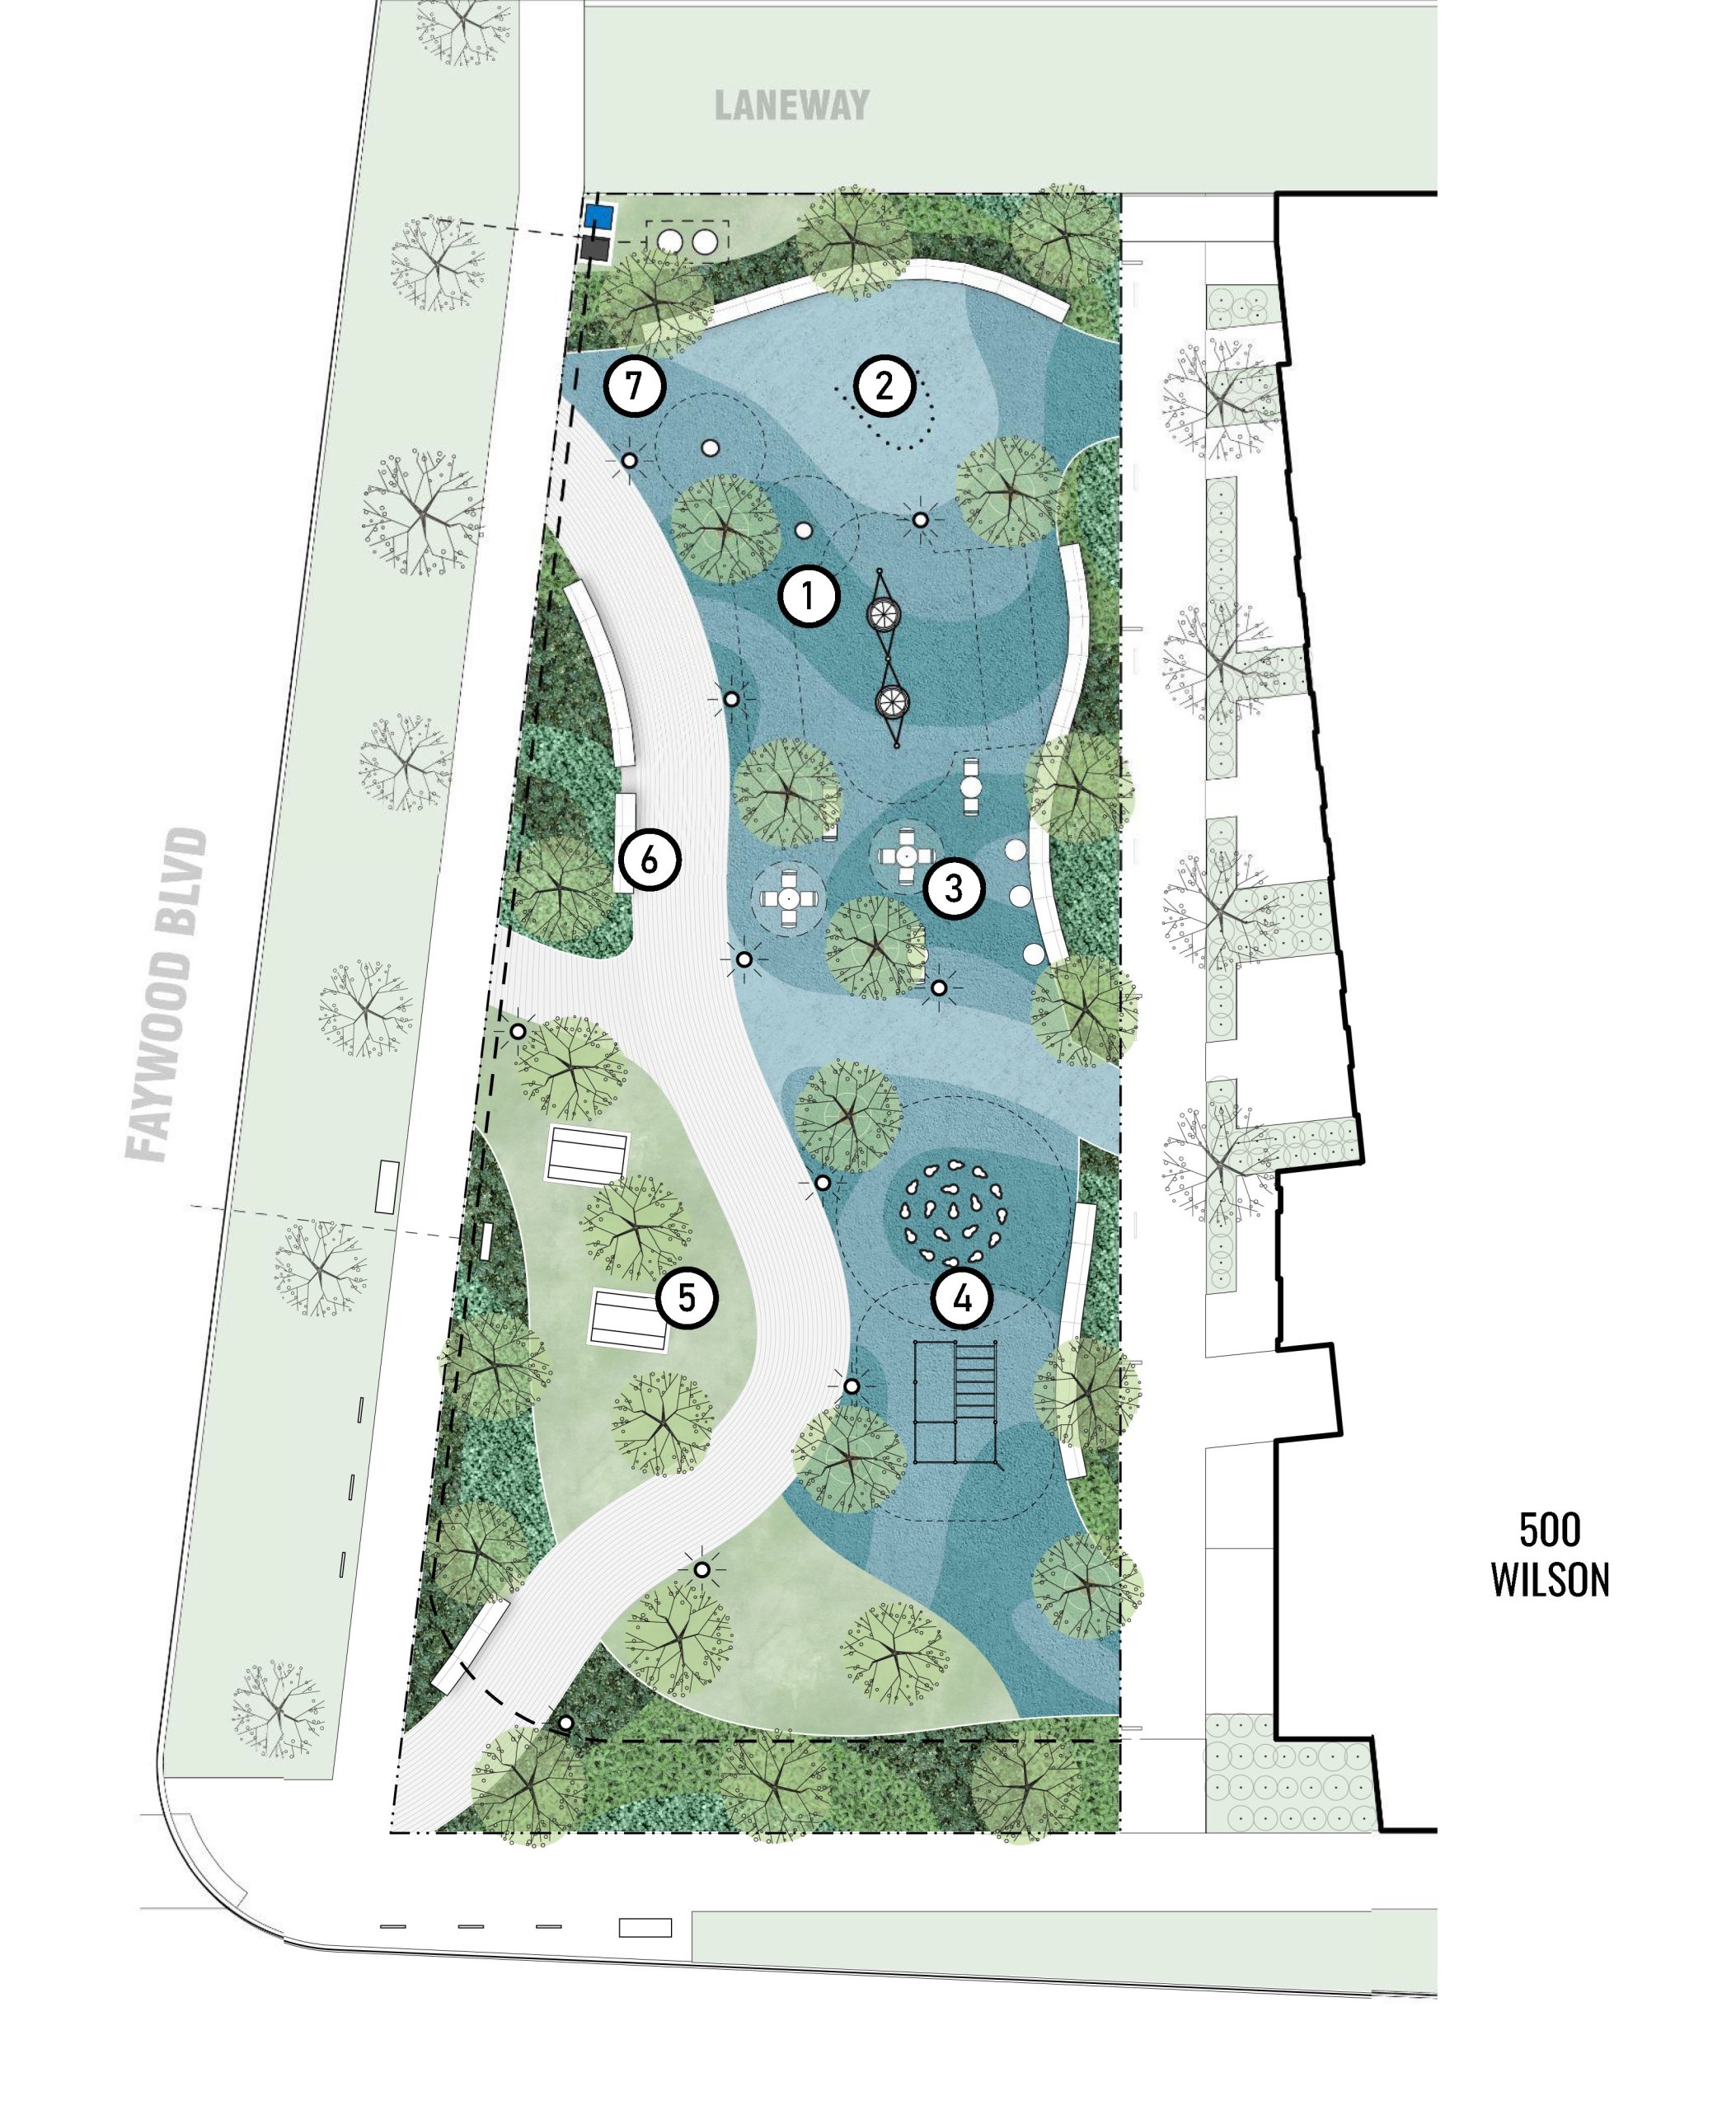 An aerial layout view of the park, with numbered labels throughout. The park is located at the northeast corner of Faywood Blvd and Wilson Ave. The north and east half of the park has blue coloured rubber and concrete surfacing, with the southwest portion of the park including a permeable pathway and lawn. From north to south end of the park the spaced include a splash pad with water jets, play area with disk swing and cup spinners, café seating area with circular tables and chairs and metal umbrellas for shade, and active space with “bamboo" climber and climbing workout station, and plantings and a park sign on the Wilson Ave frontage. West of the active space, across from the main park pathways, is an area for picnic table seating. There are trees planted throughout the park to provide shade, plentiful benches and plantings along the perimeter of the park, and lighting along the main park path. There are six entry and exit ways, three on the east side and three on the west side, spaced fairly evenly through the park. A mid-height fence will be installed around the park perimeter, excluding pathways.